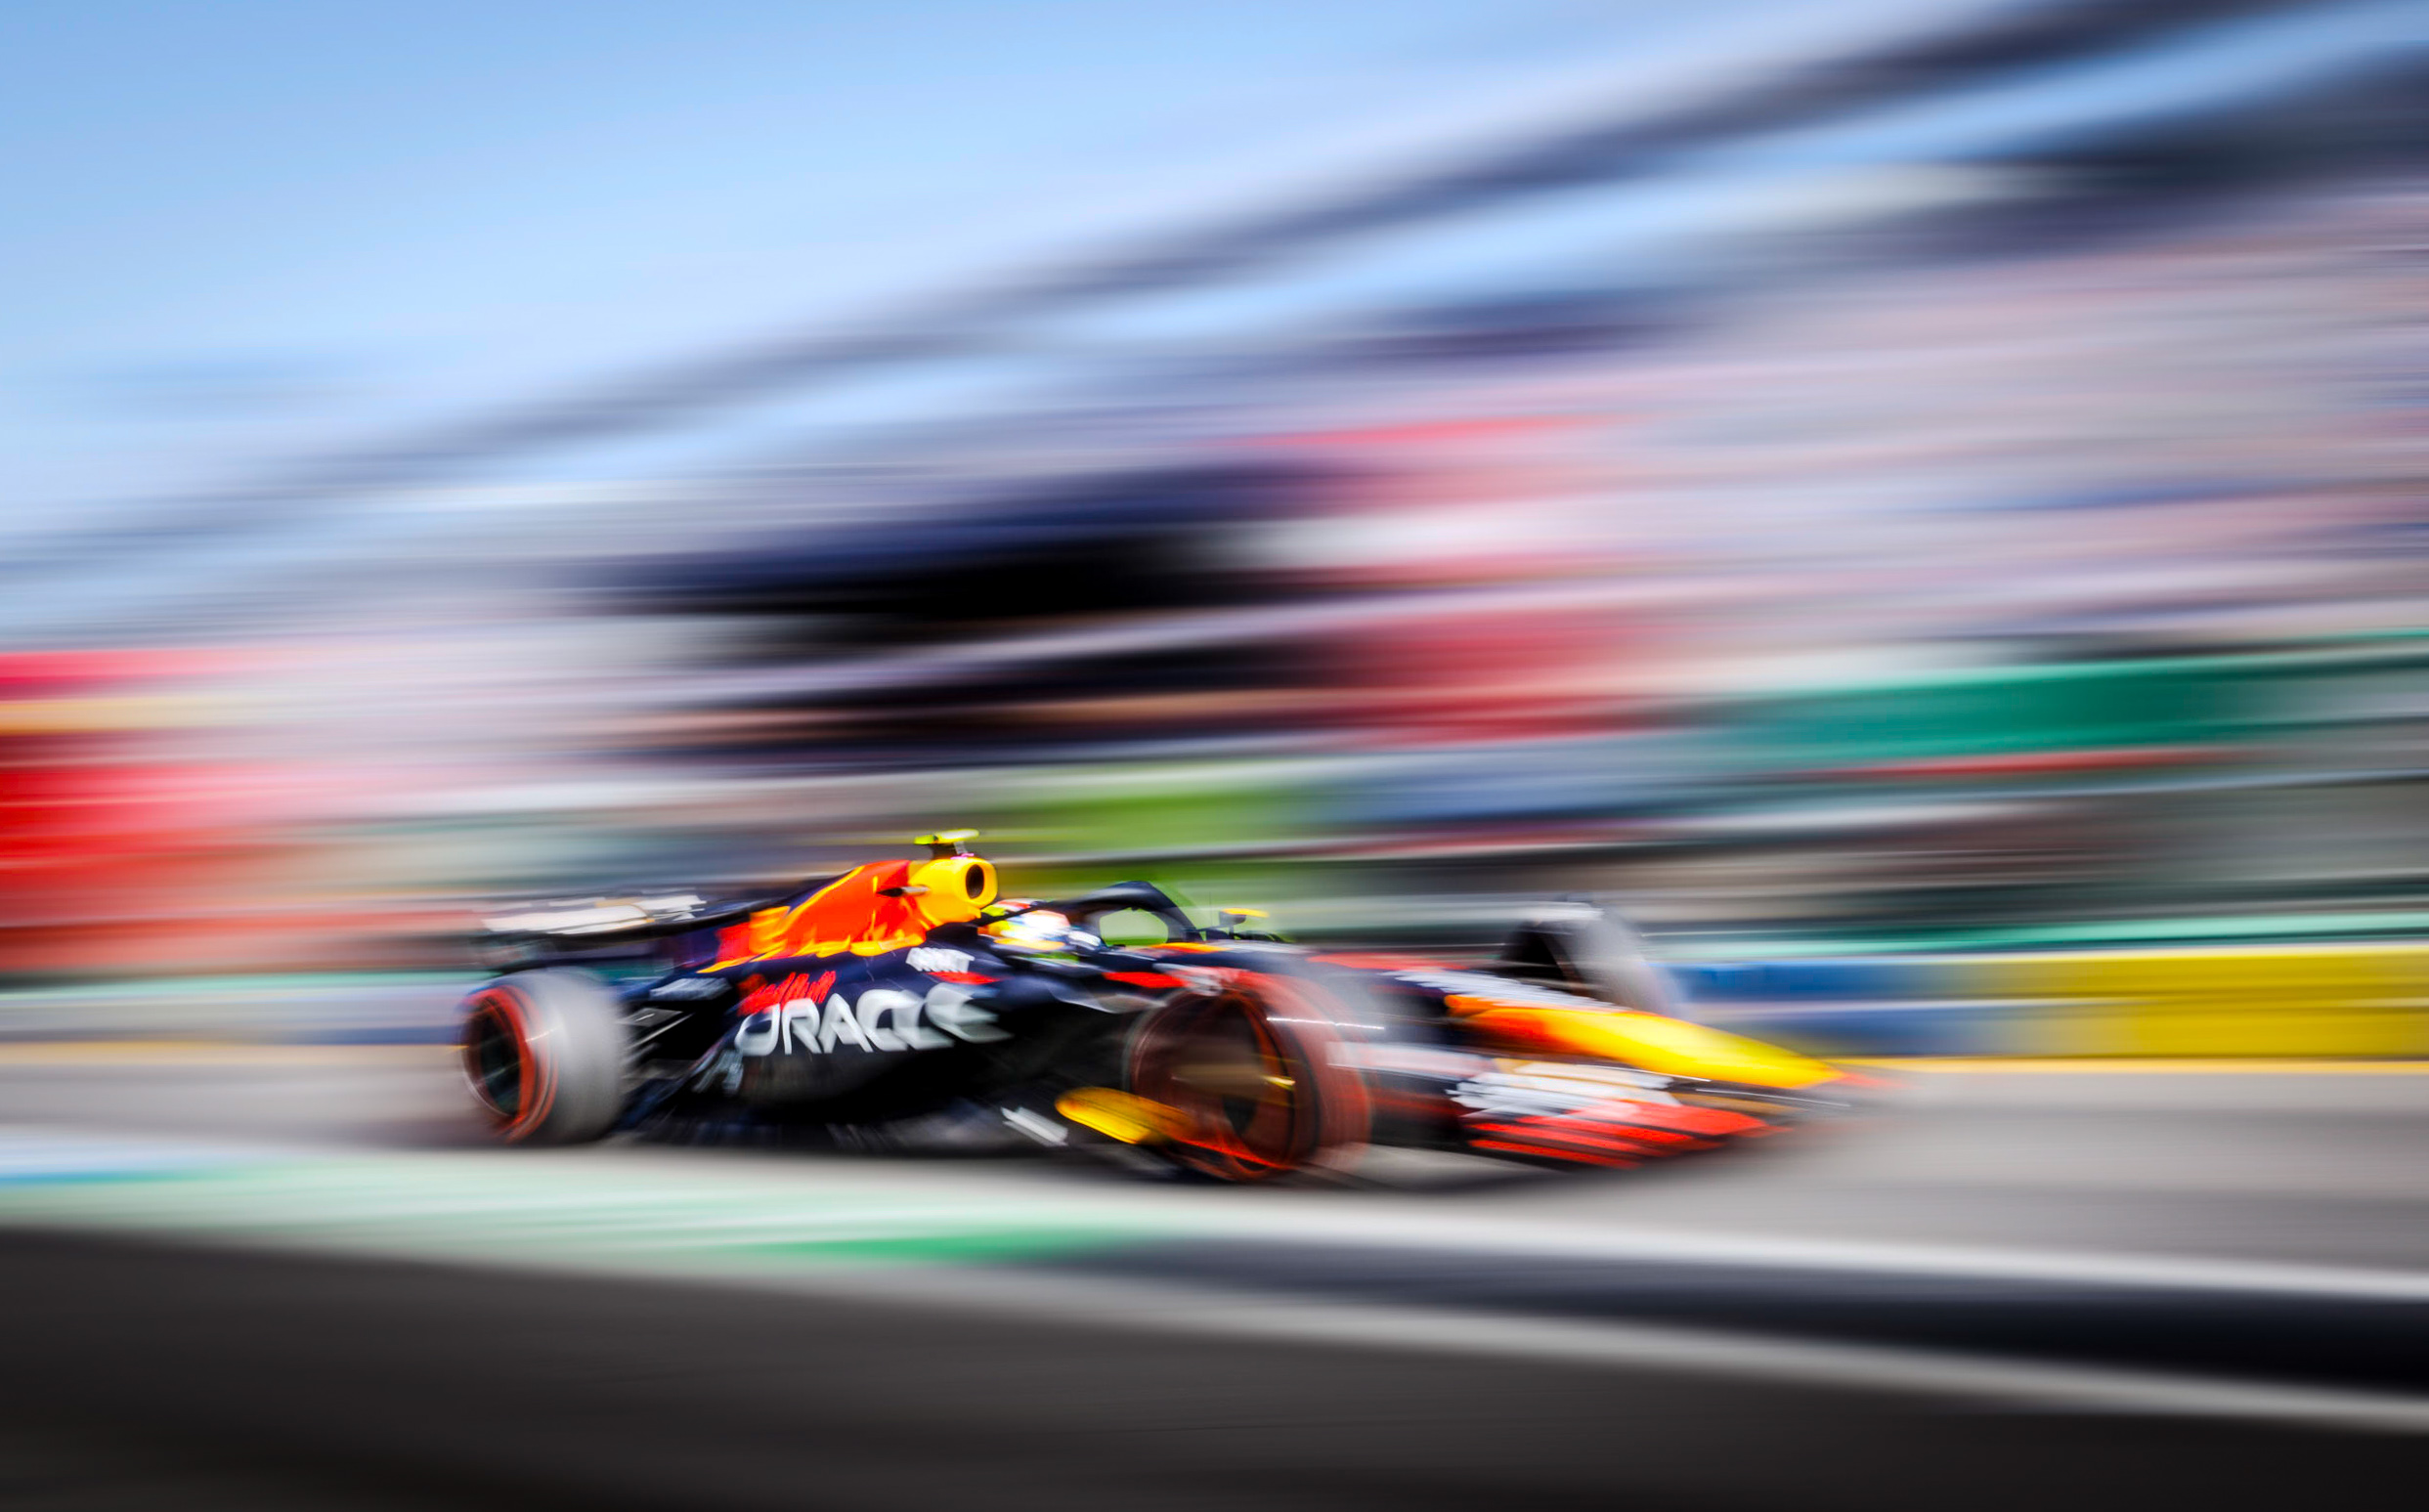 MELBOURNE - April 2, 2023: Sergio Perez (MEX) driving the (11) Red Bull Racing-Honda RBPT RB19 heads out onto pitlane to take his place on the grid for the start of the 2023 Formula 1 Rolex Australian Grand Prix in Melbourne, Australia.